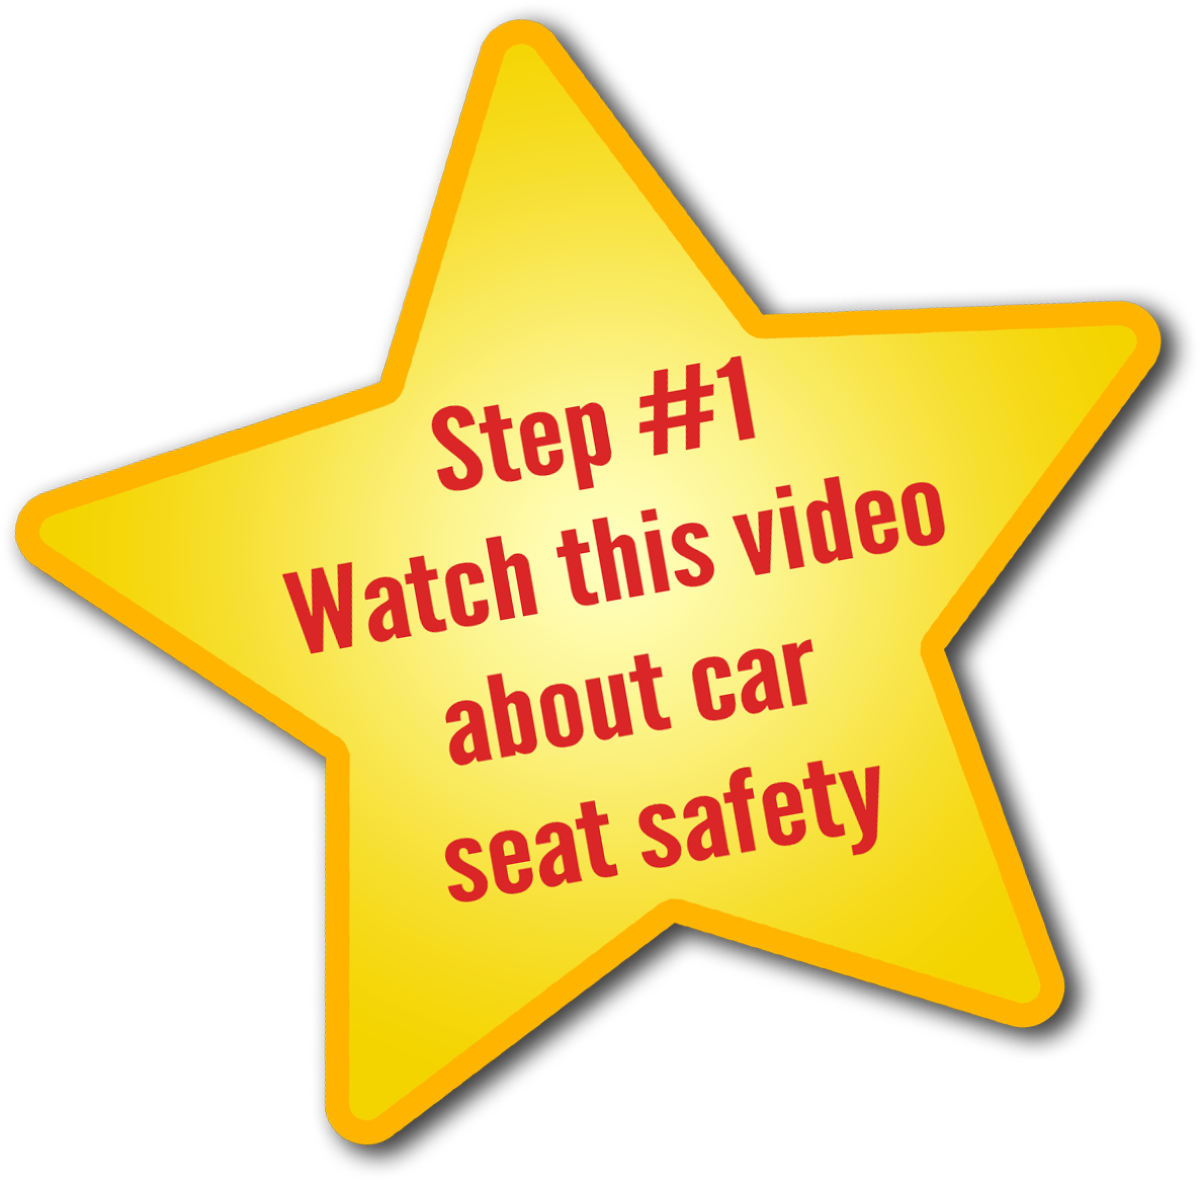 Step 1 - Watch this video about car seat safety